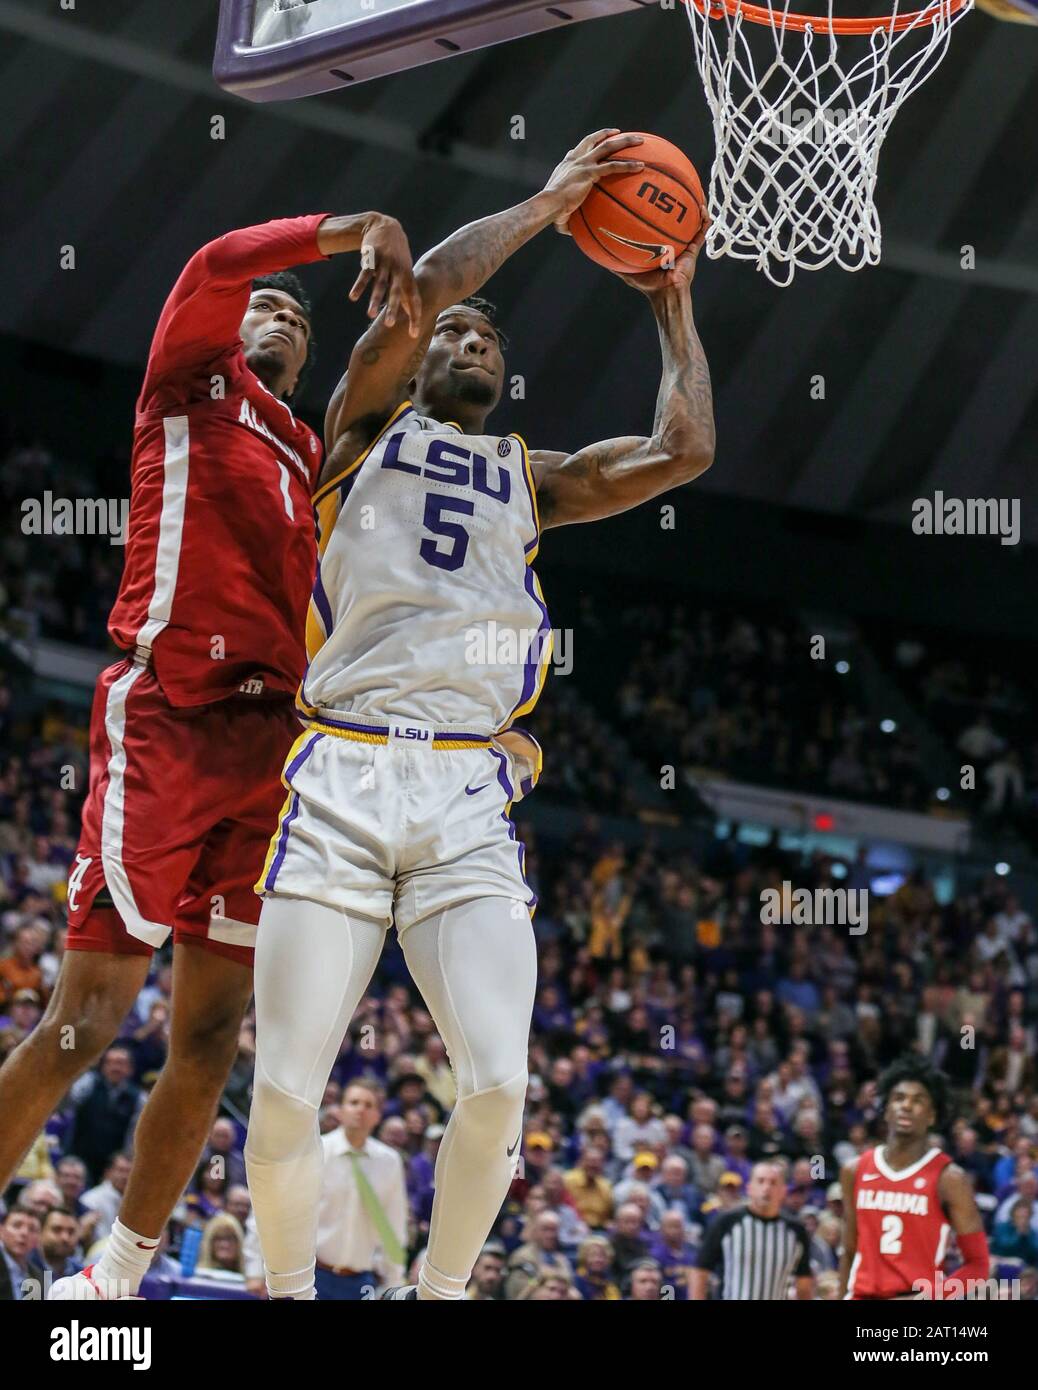 Baton Rouge, LA, USA. 29th Jan, 2020. LSU's Emmitt Williams (5) goes for a dunk past Alabama's Herbert Jones (1) during NCAA Basketball action between the Alabama Crimson Tide and the LSU Tigers at the Pete Maravich Assembly Center in Baton Rouge, LA. Jonathan Mailhes/CSM/Alamy Live News Stock Photo